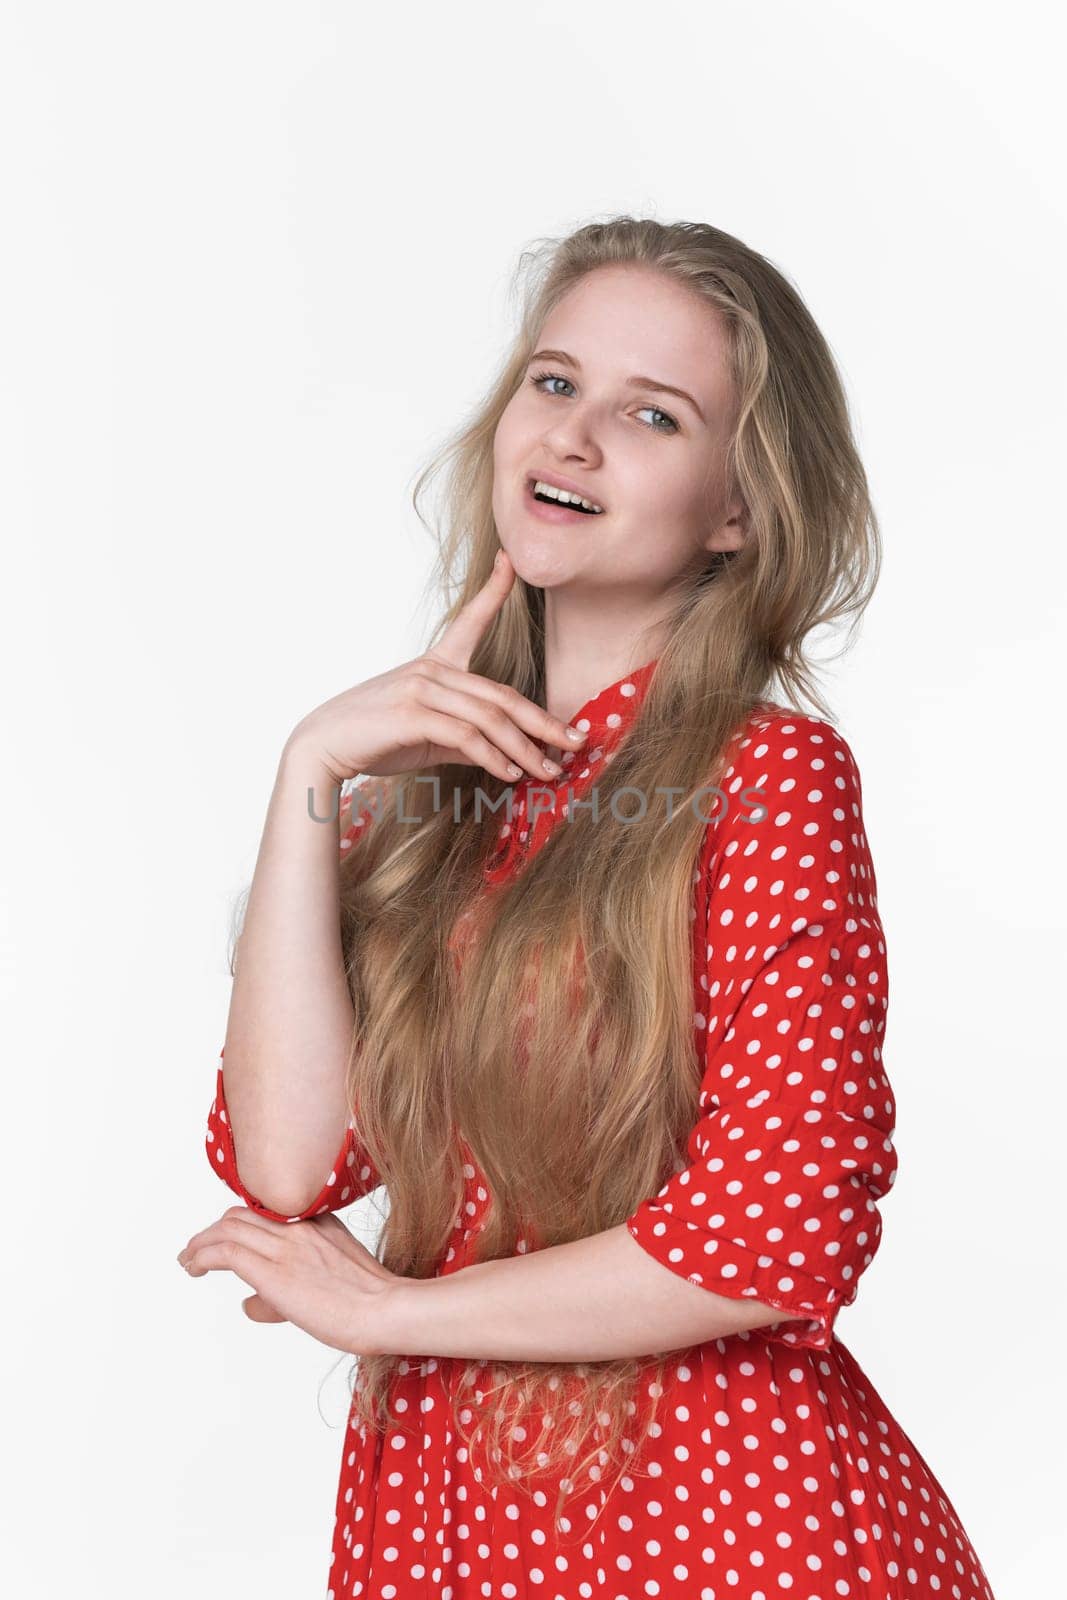 Playful young blonde female with long hair dressed in summer red polka dot dress poses on white background. Smiling Caucasian model 21 years old looking at camera. Studio shot, front view, waist up